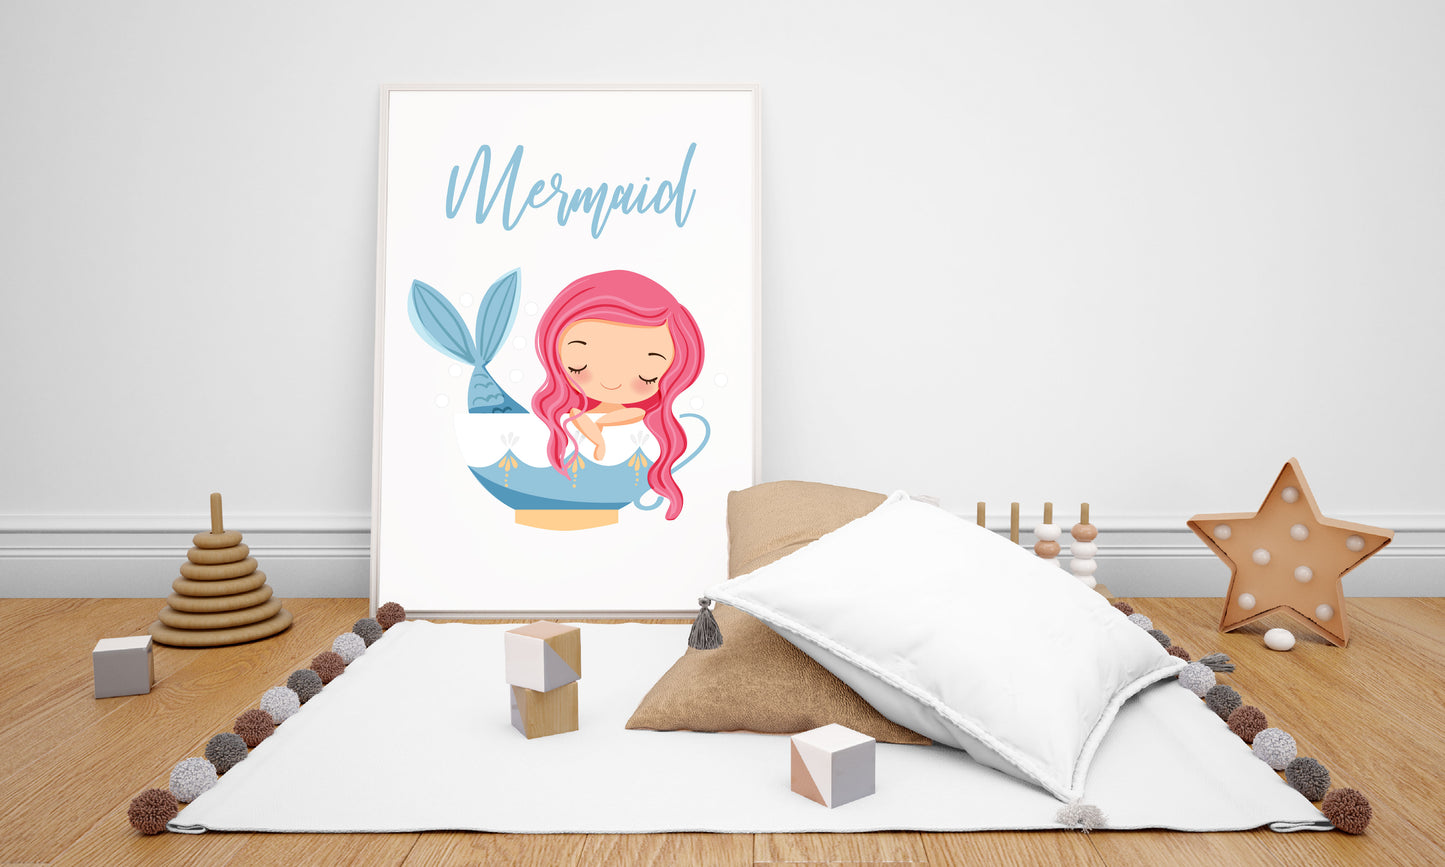 Cute Mermaids – A Whimsical Underwater Illustration Collection.